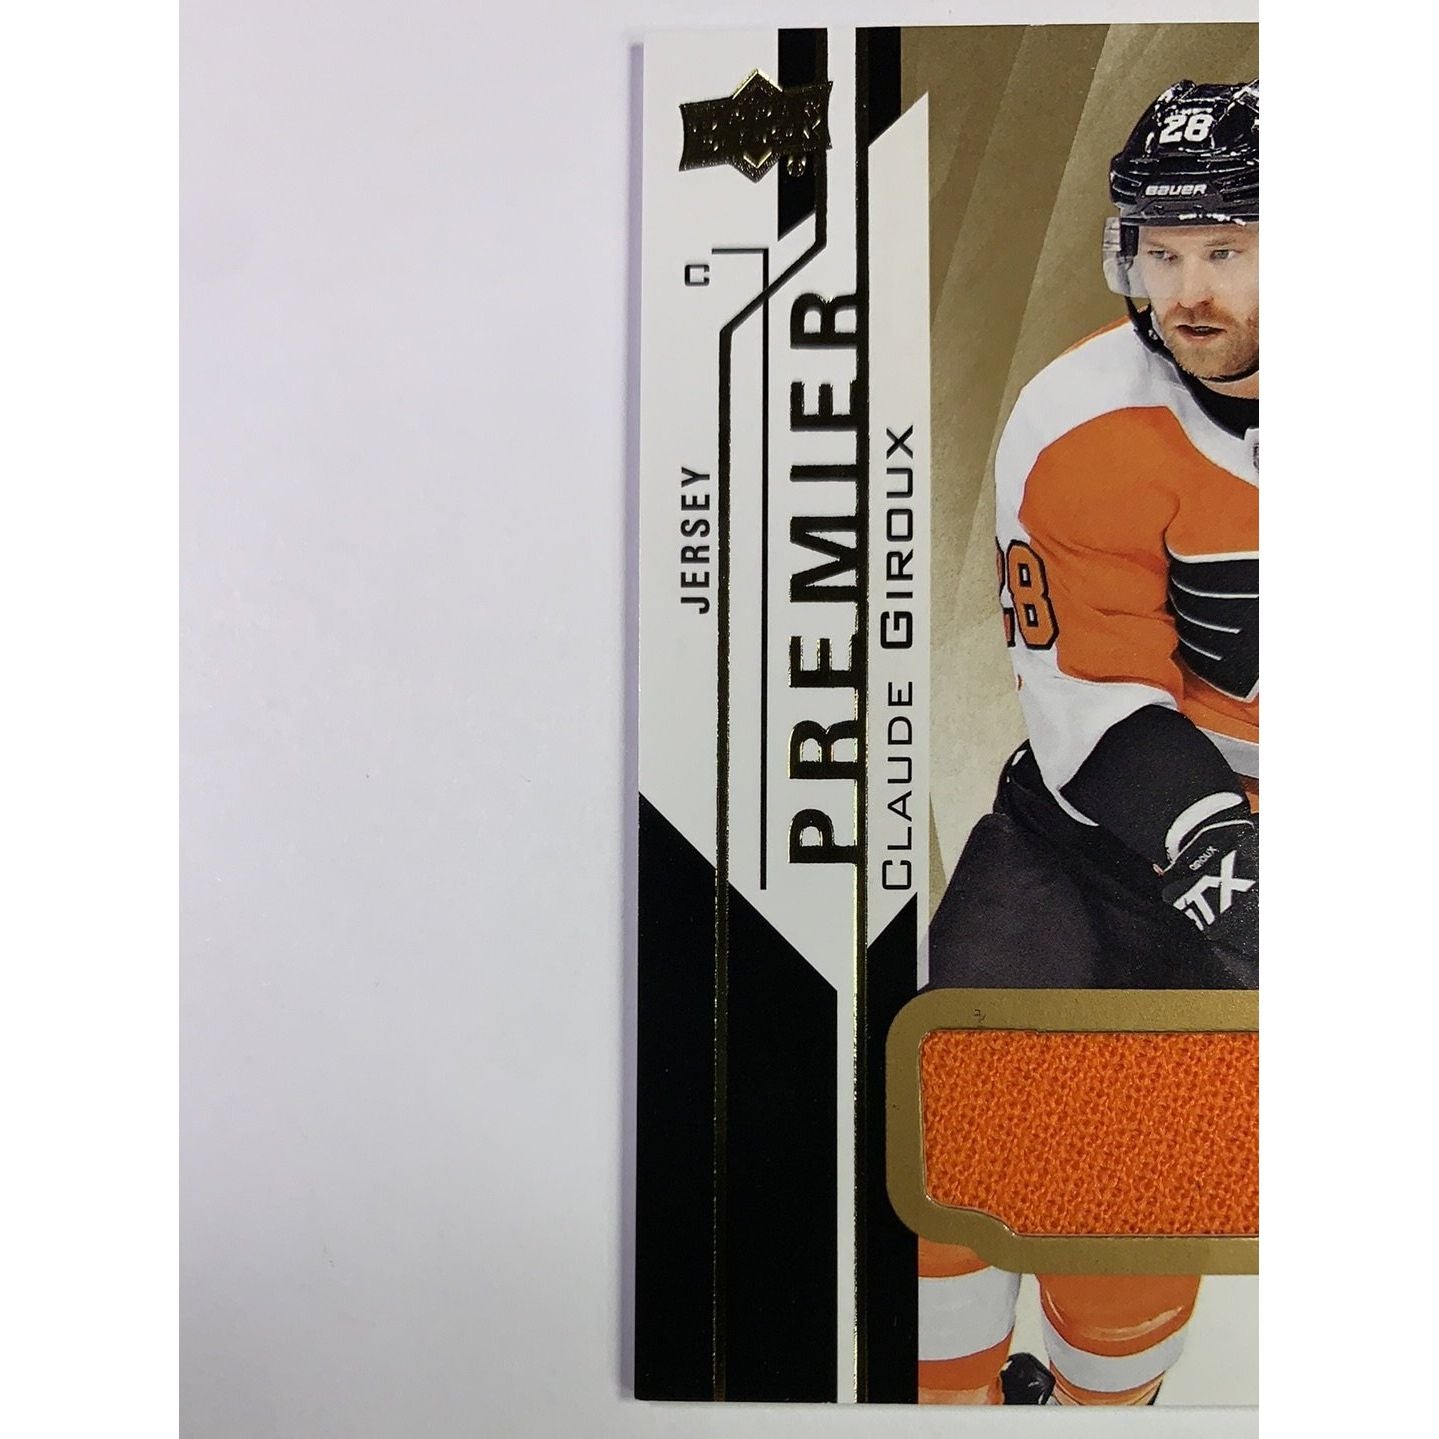  2018-19 Premier Claude Giroux Jersey Patch  Local Legends Cards & Collectibles